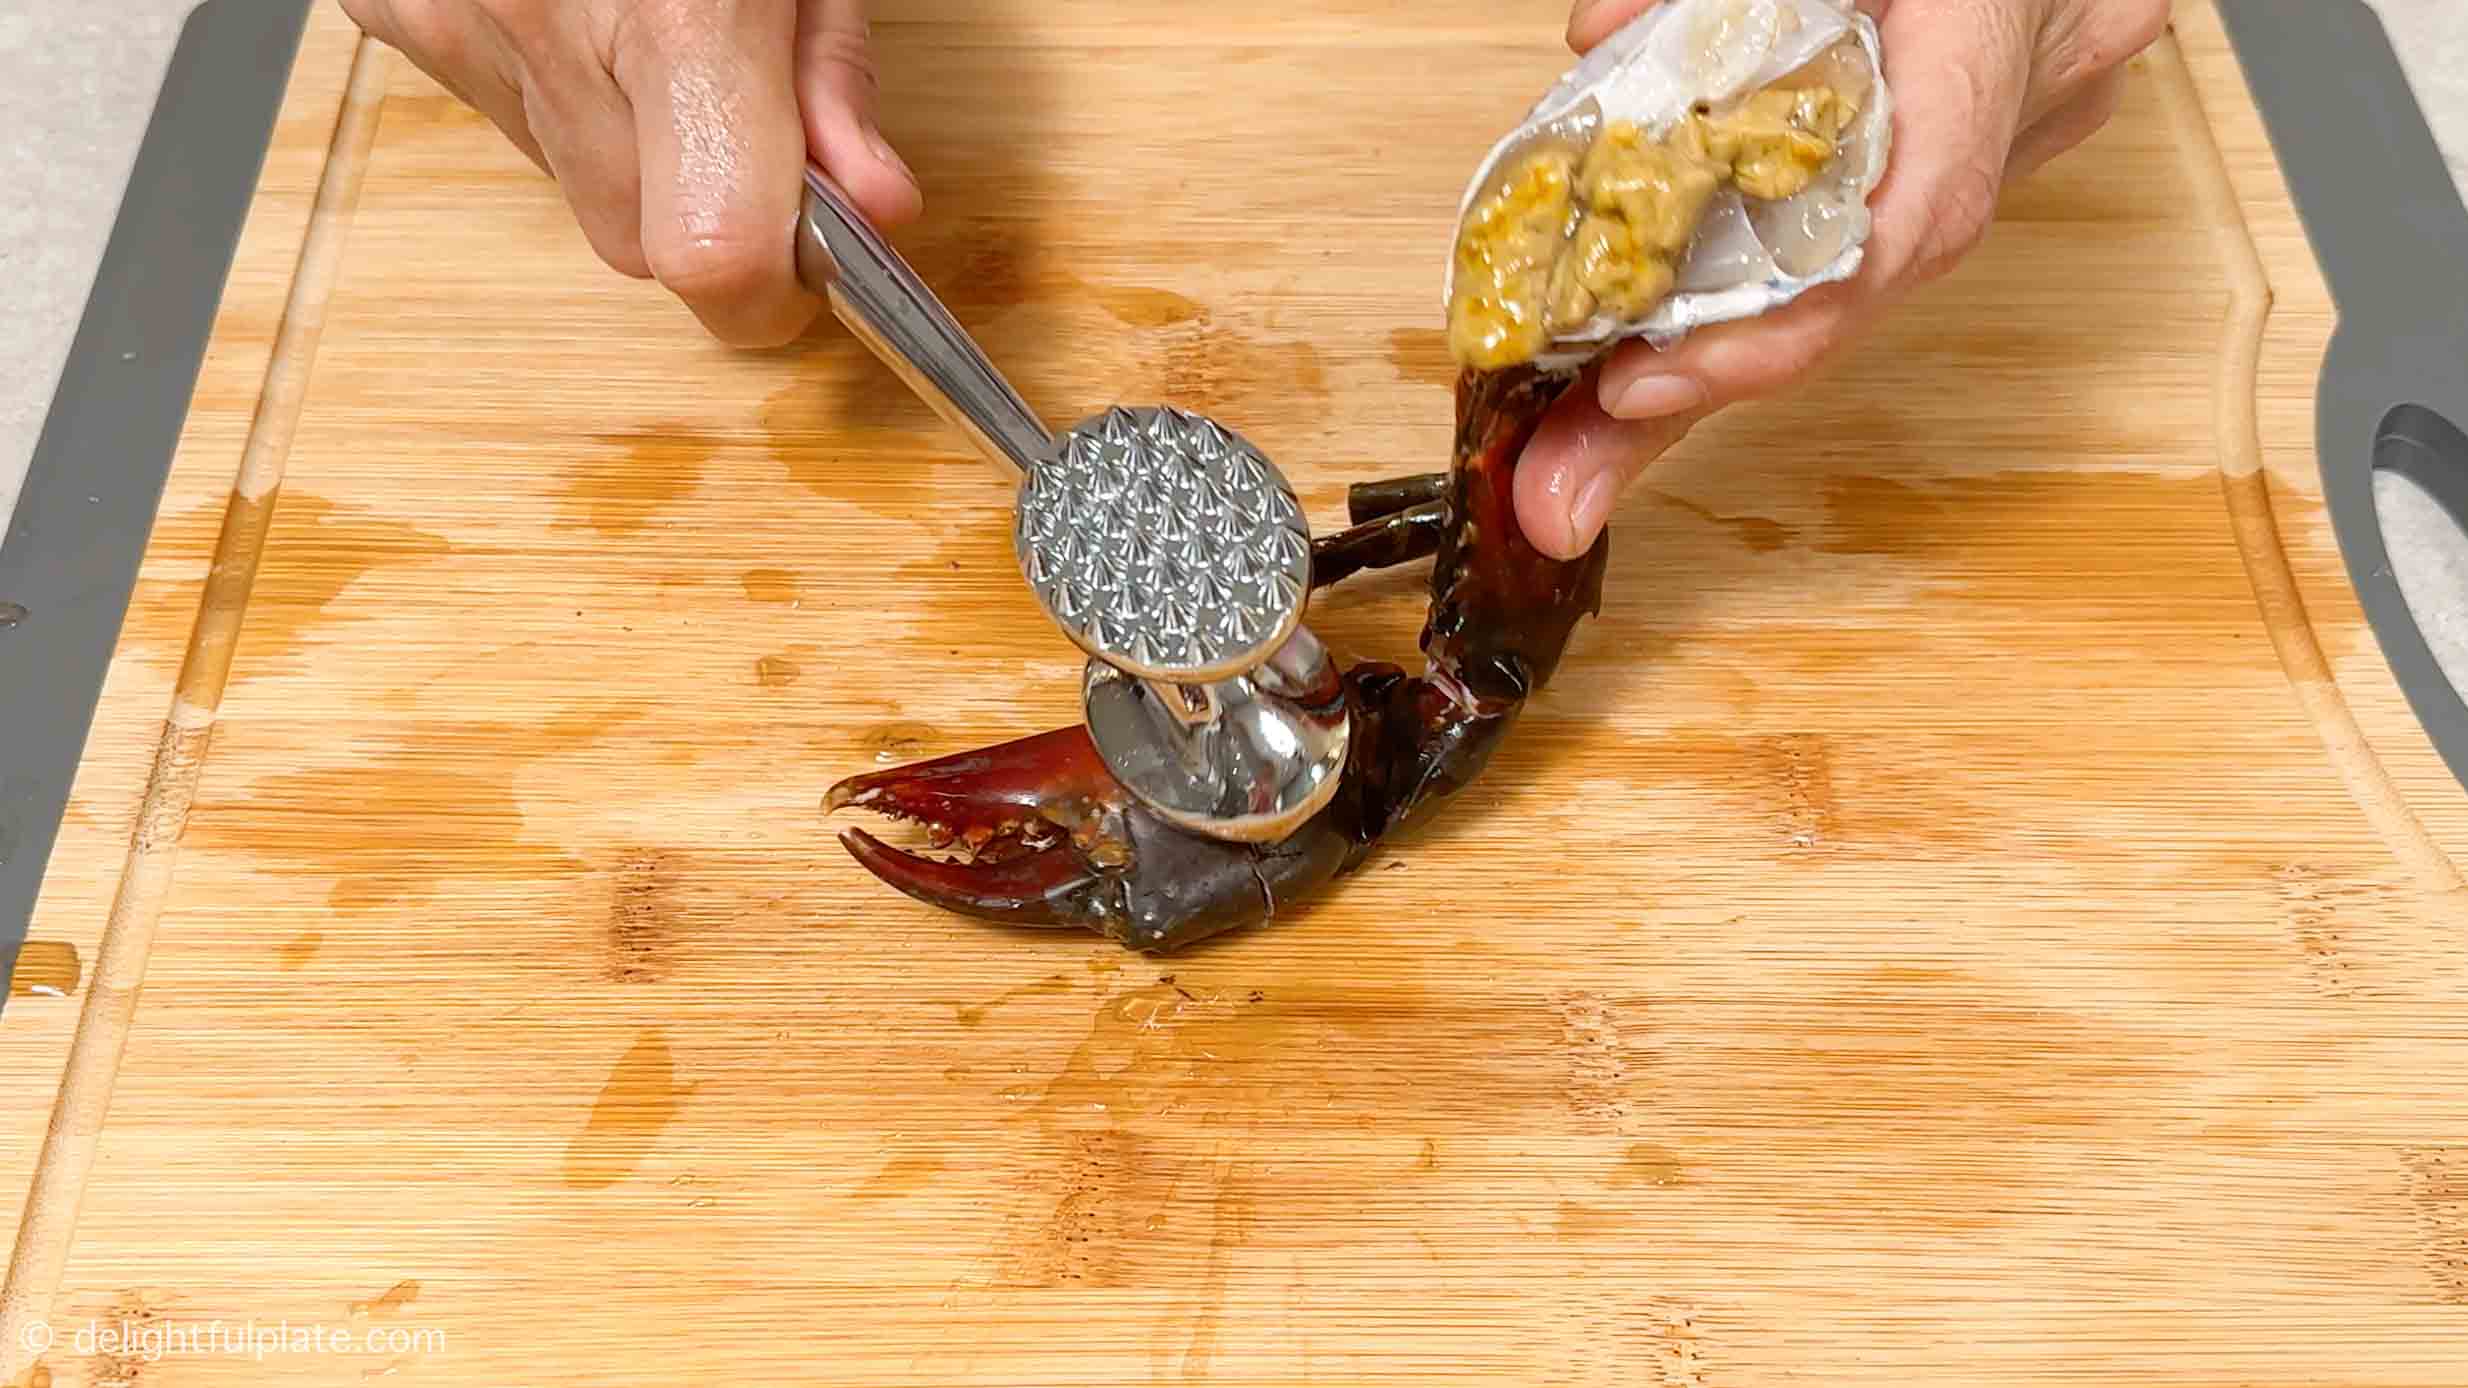 cracking a crab claw with a mallet.